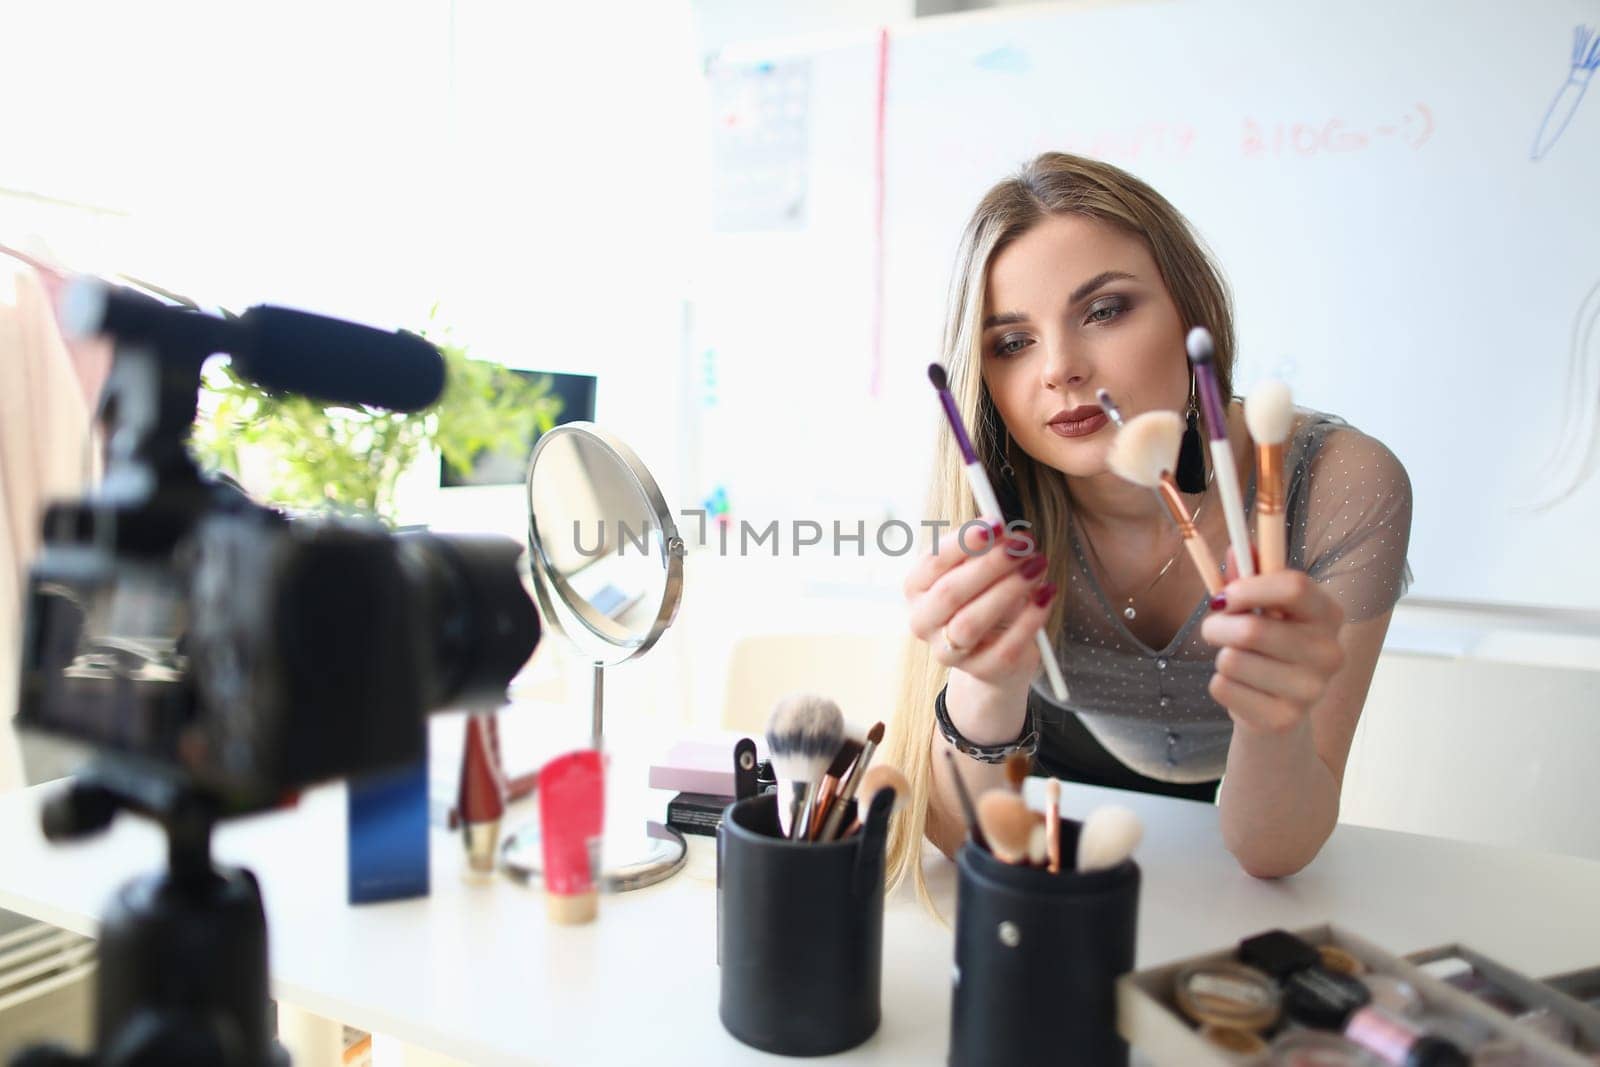 Beauty blogger shoots daily women makeup routine videos on camera. Selection of brushes for applying makeup concept